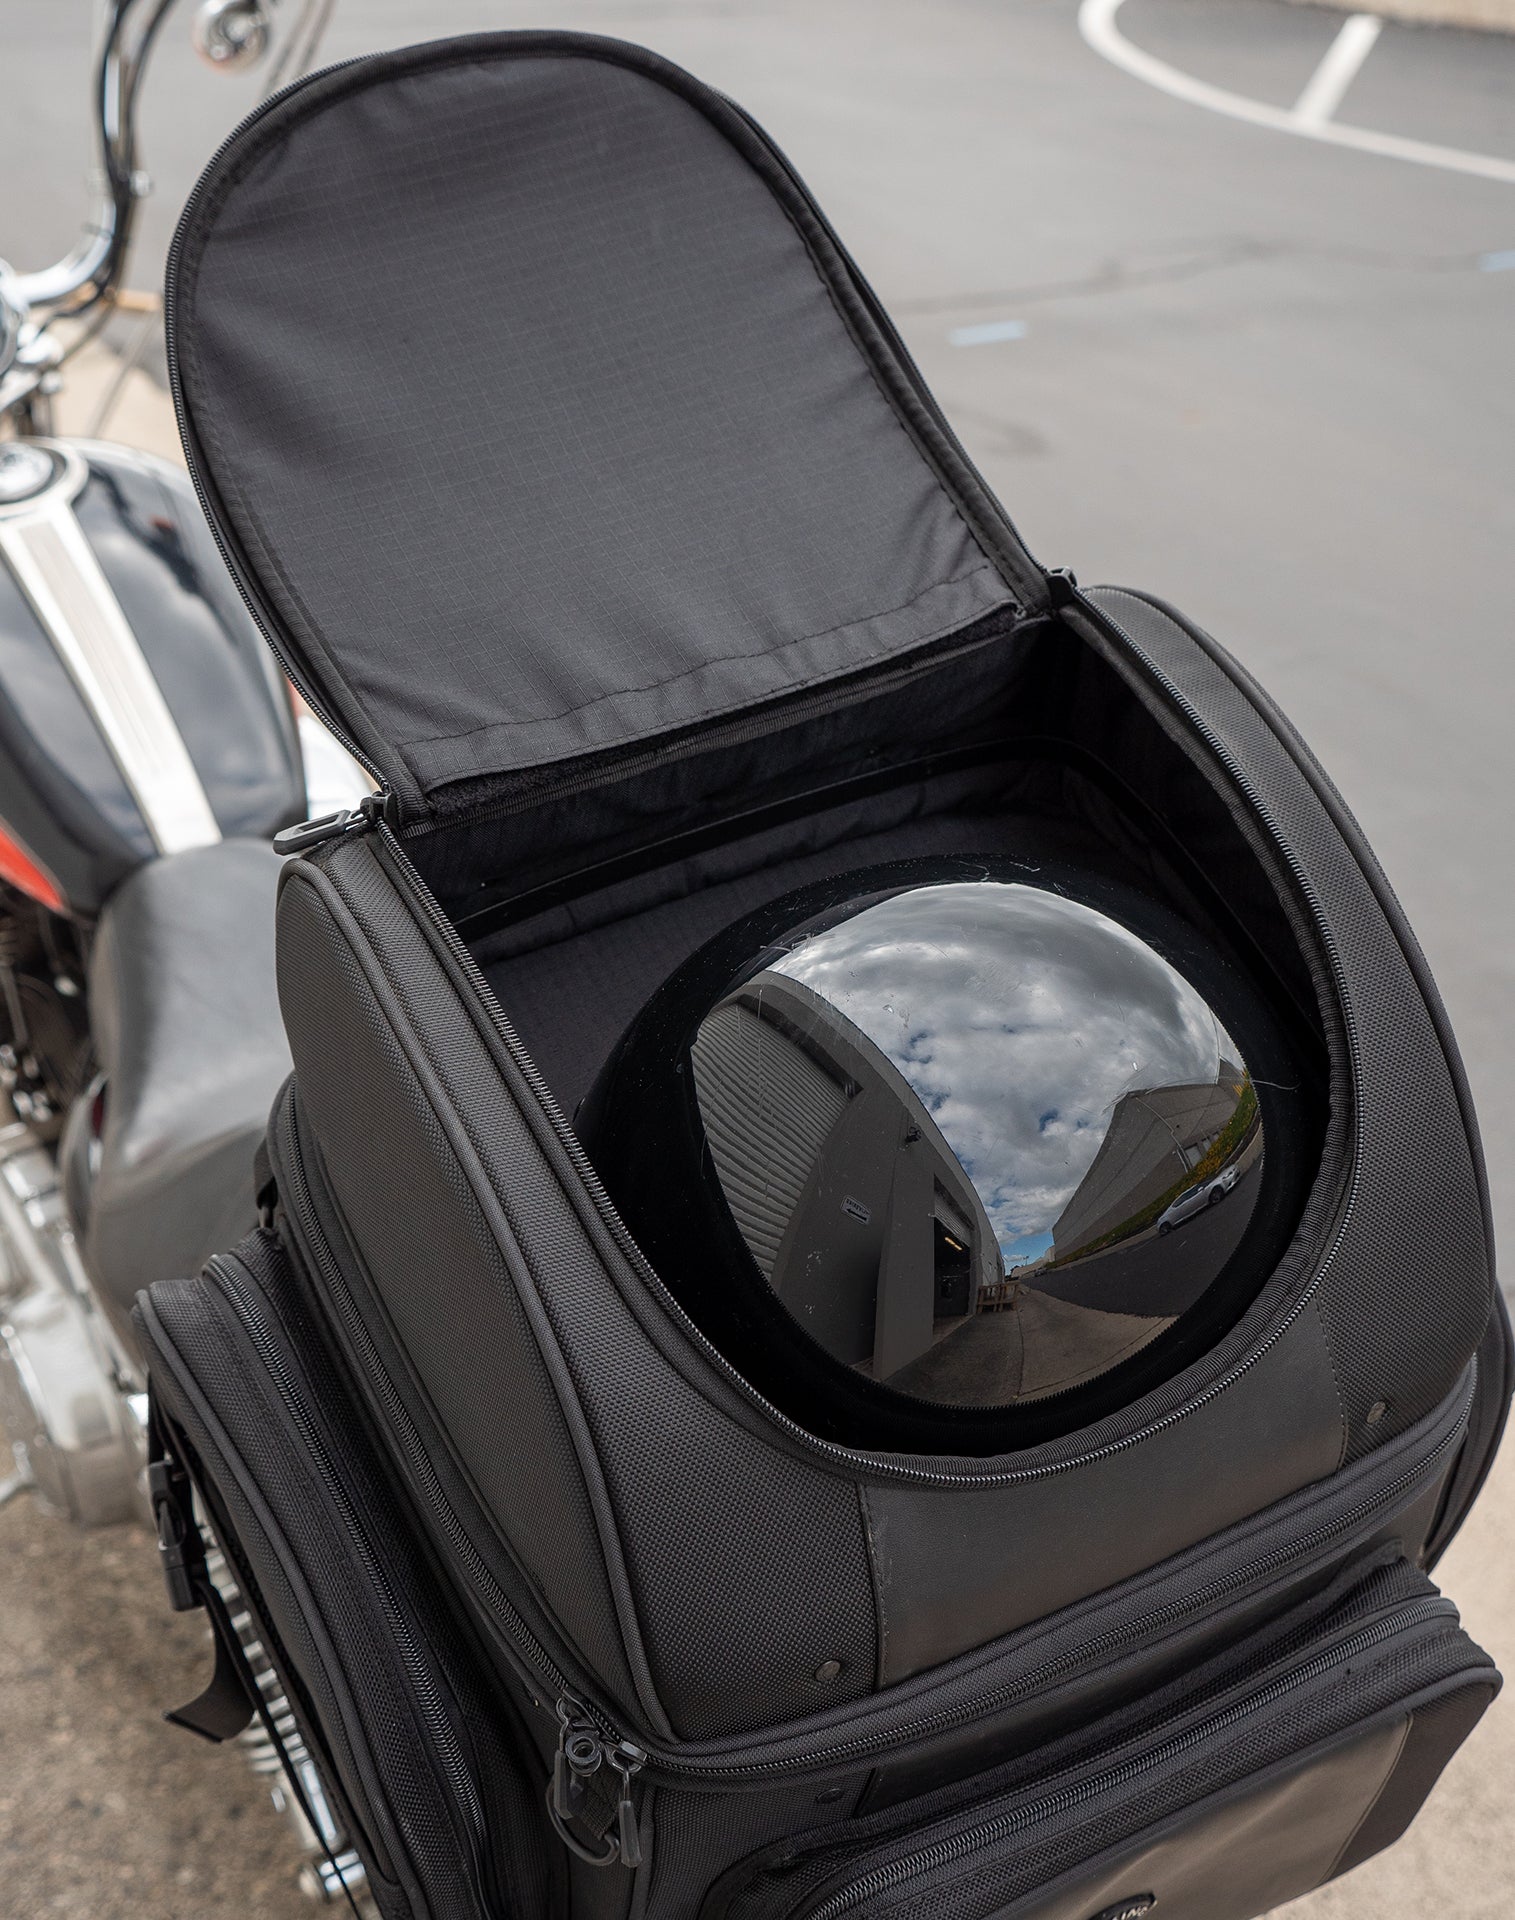 52L - Galleon XL Motorcycle Seat Luggage